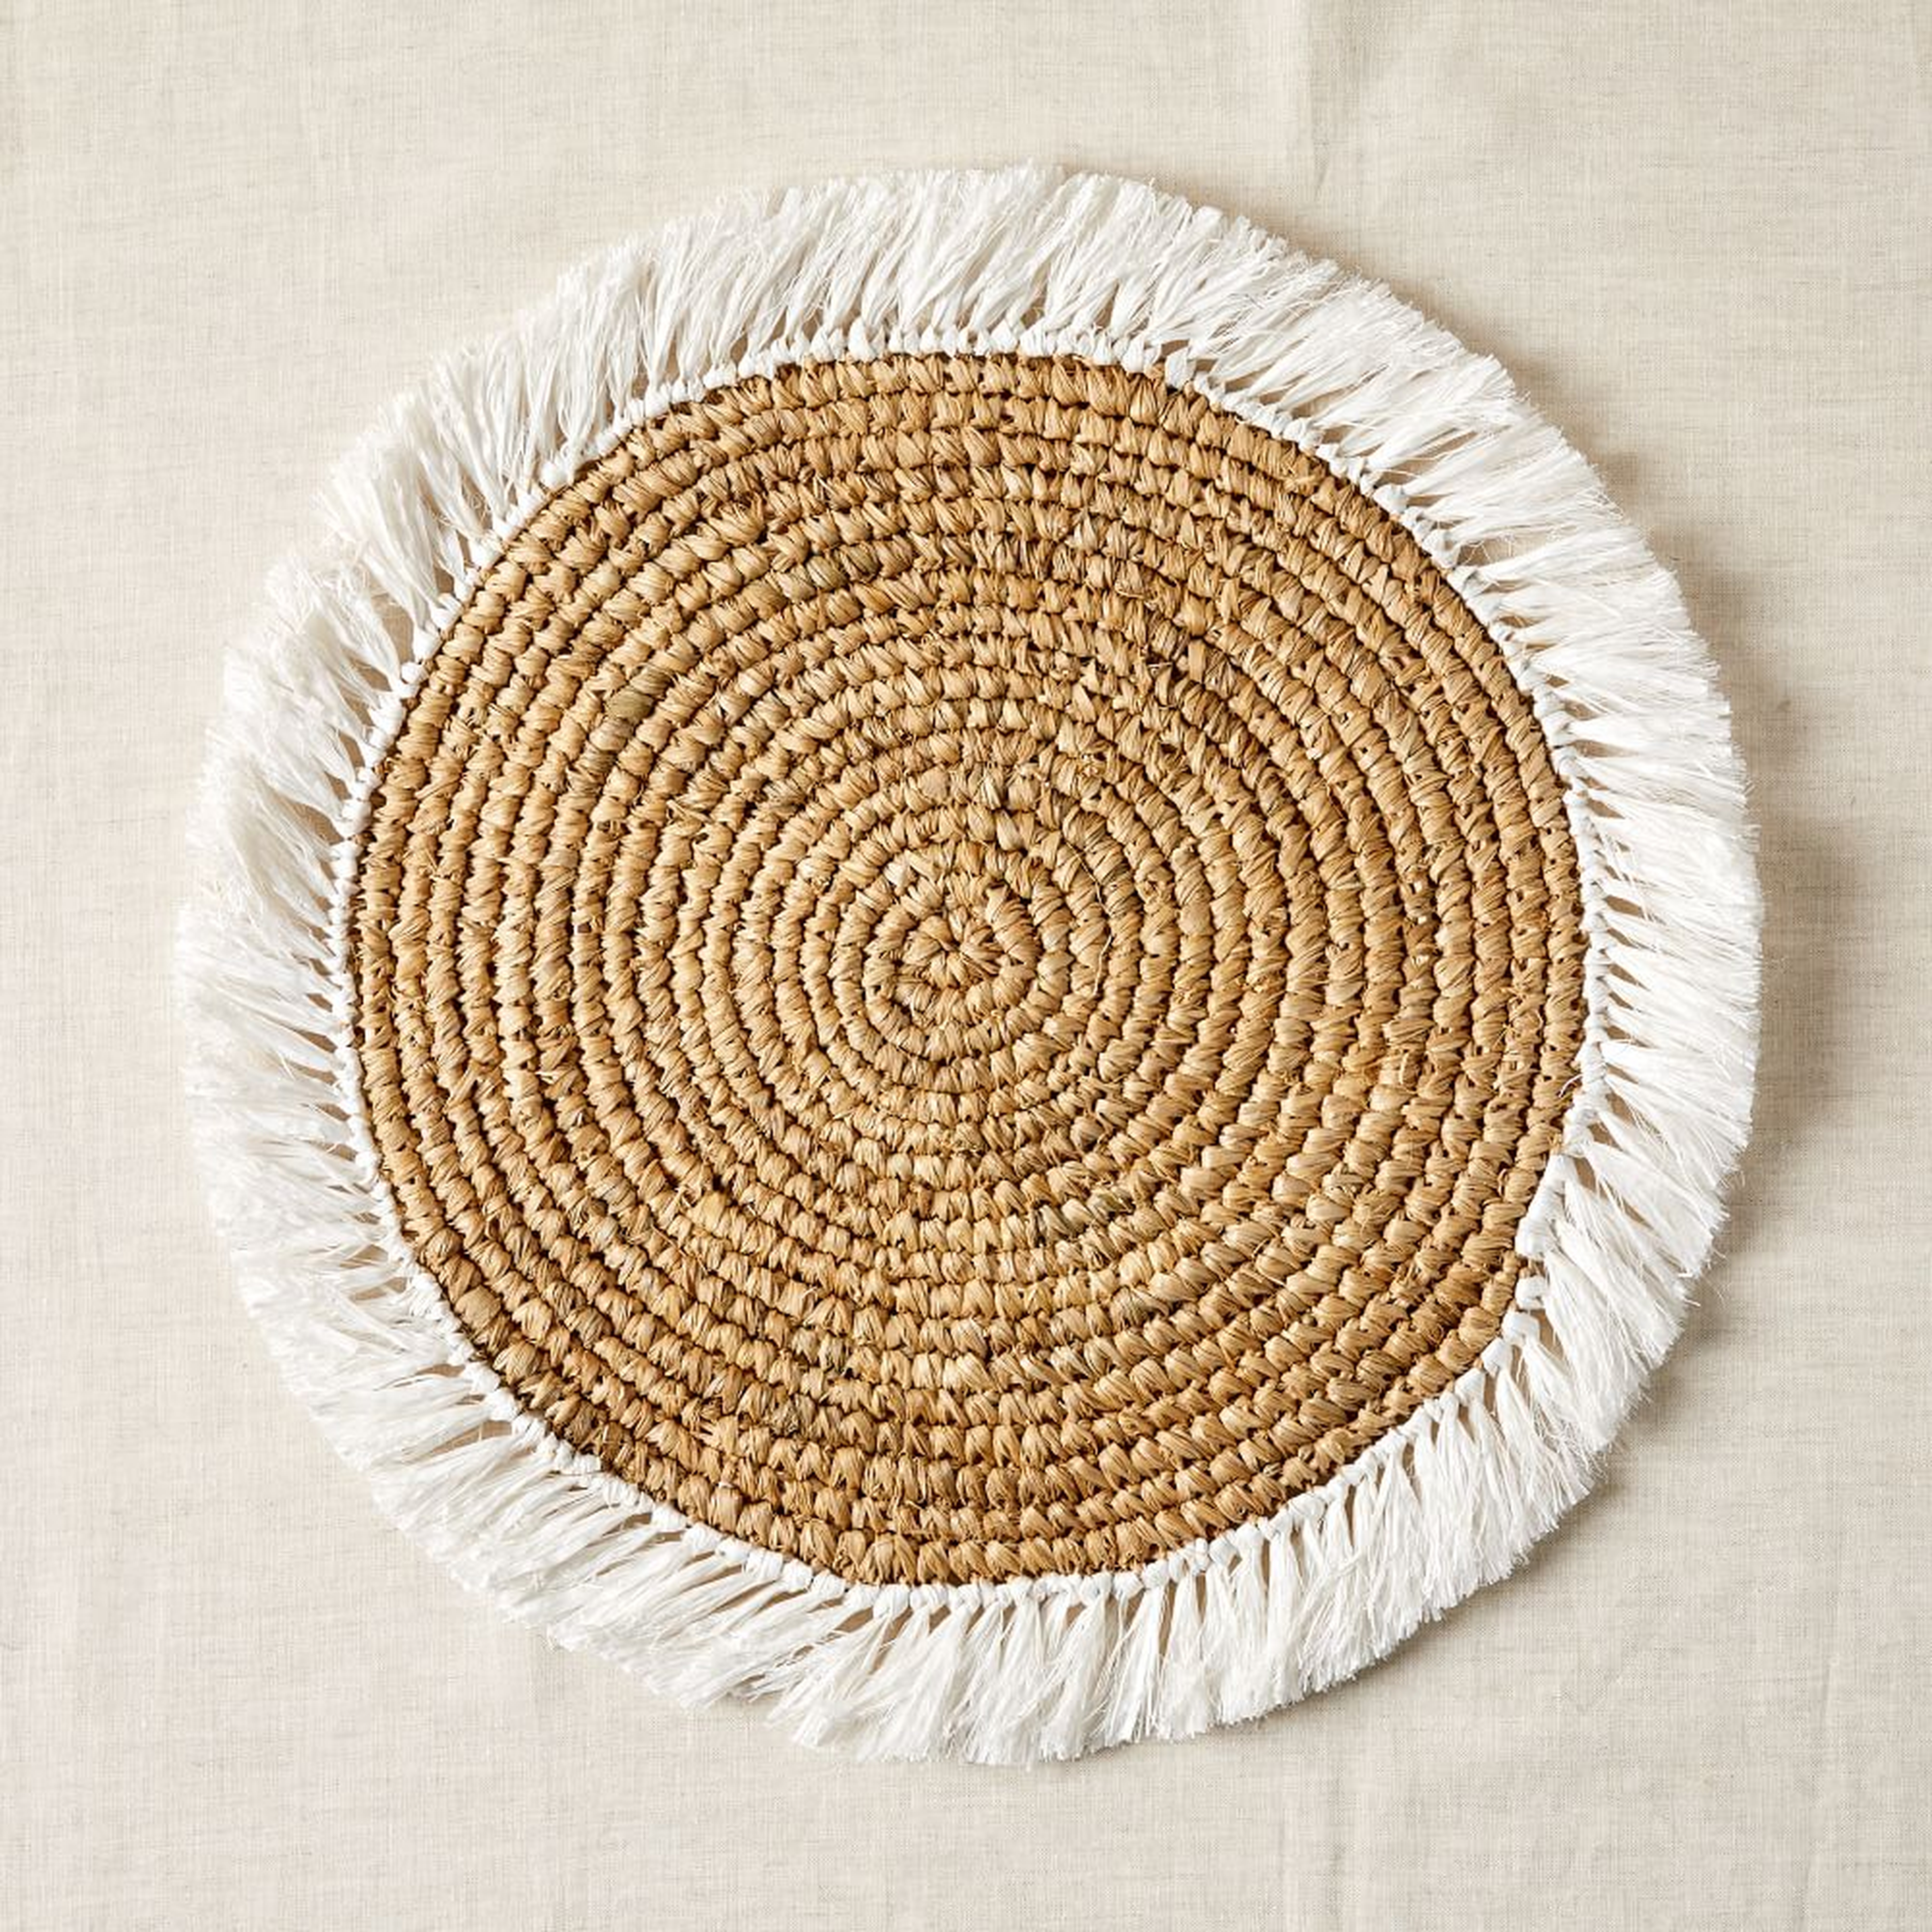 Woven Brights Collection, Placemat, Natural + Stone White - West Elm